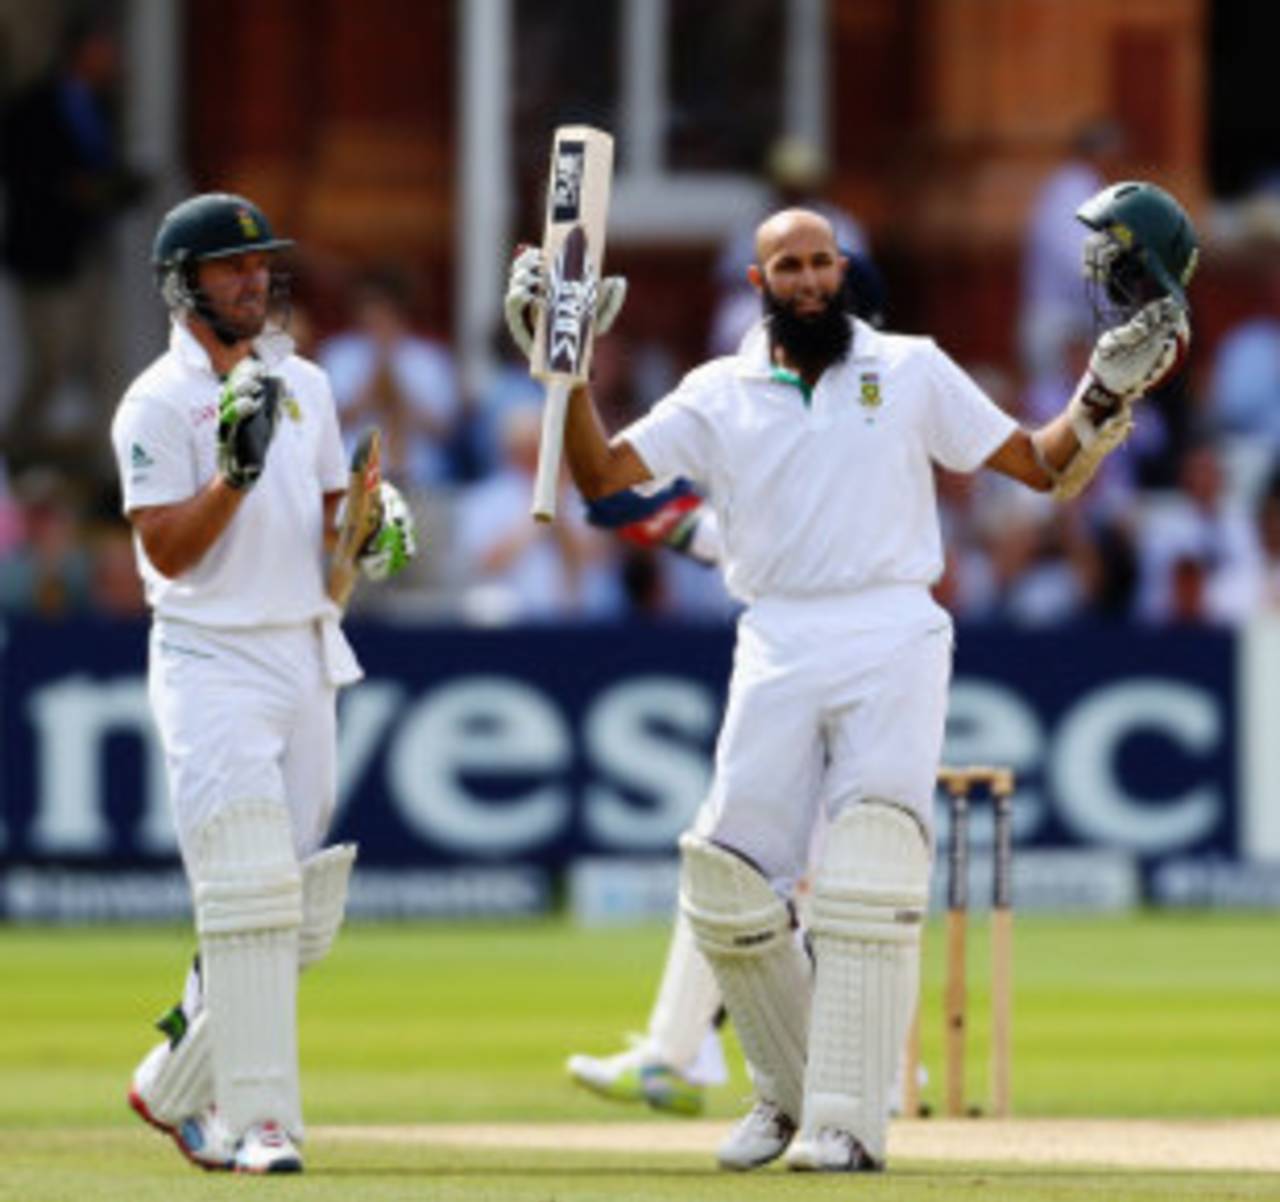 AB de Villiers applauds Hashim Amla's century, England v South Africa, 3rd Investec Test, Lord's, 4th day, August 19, 2012